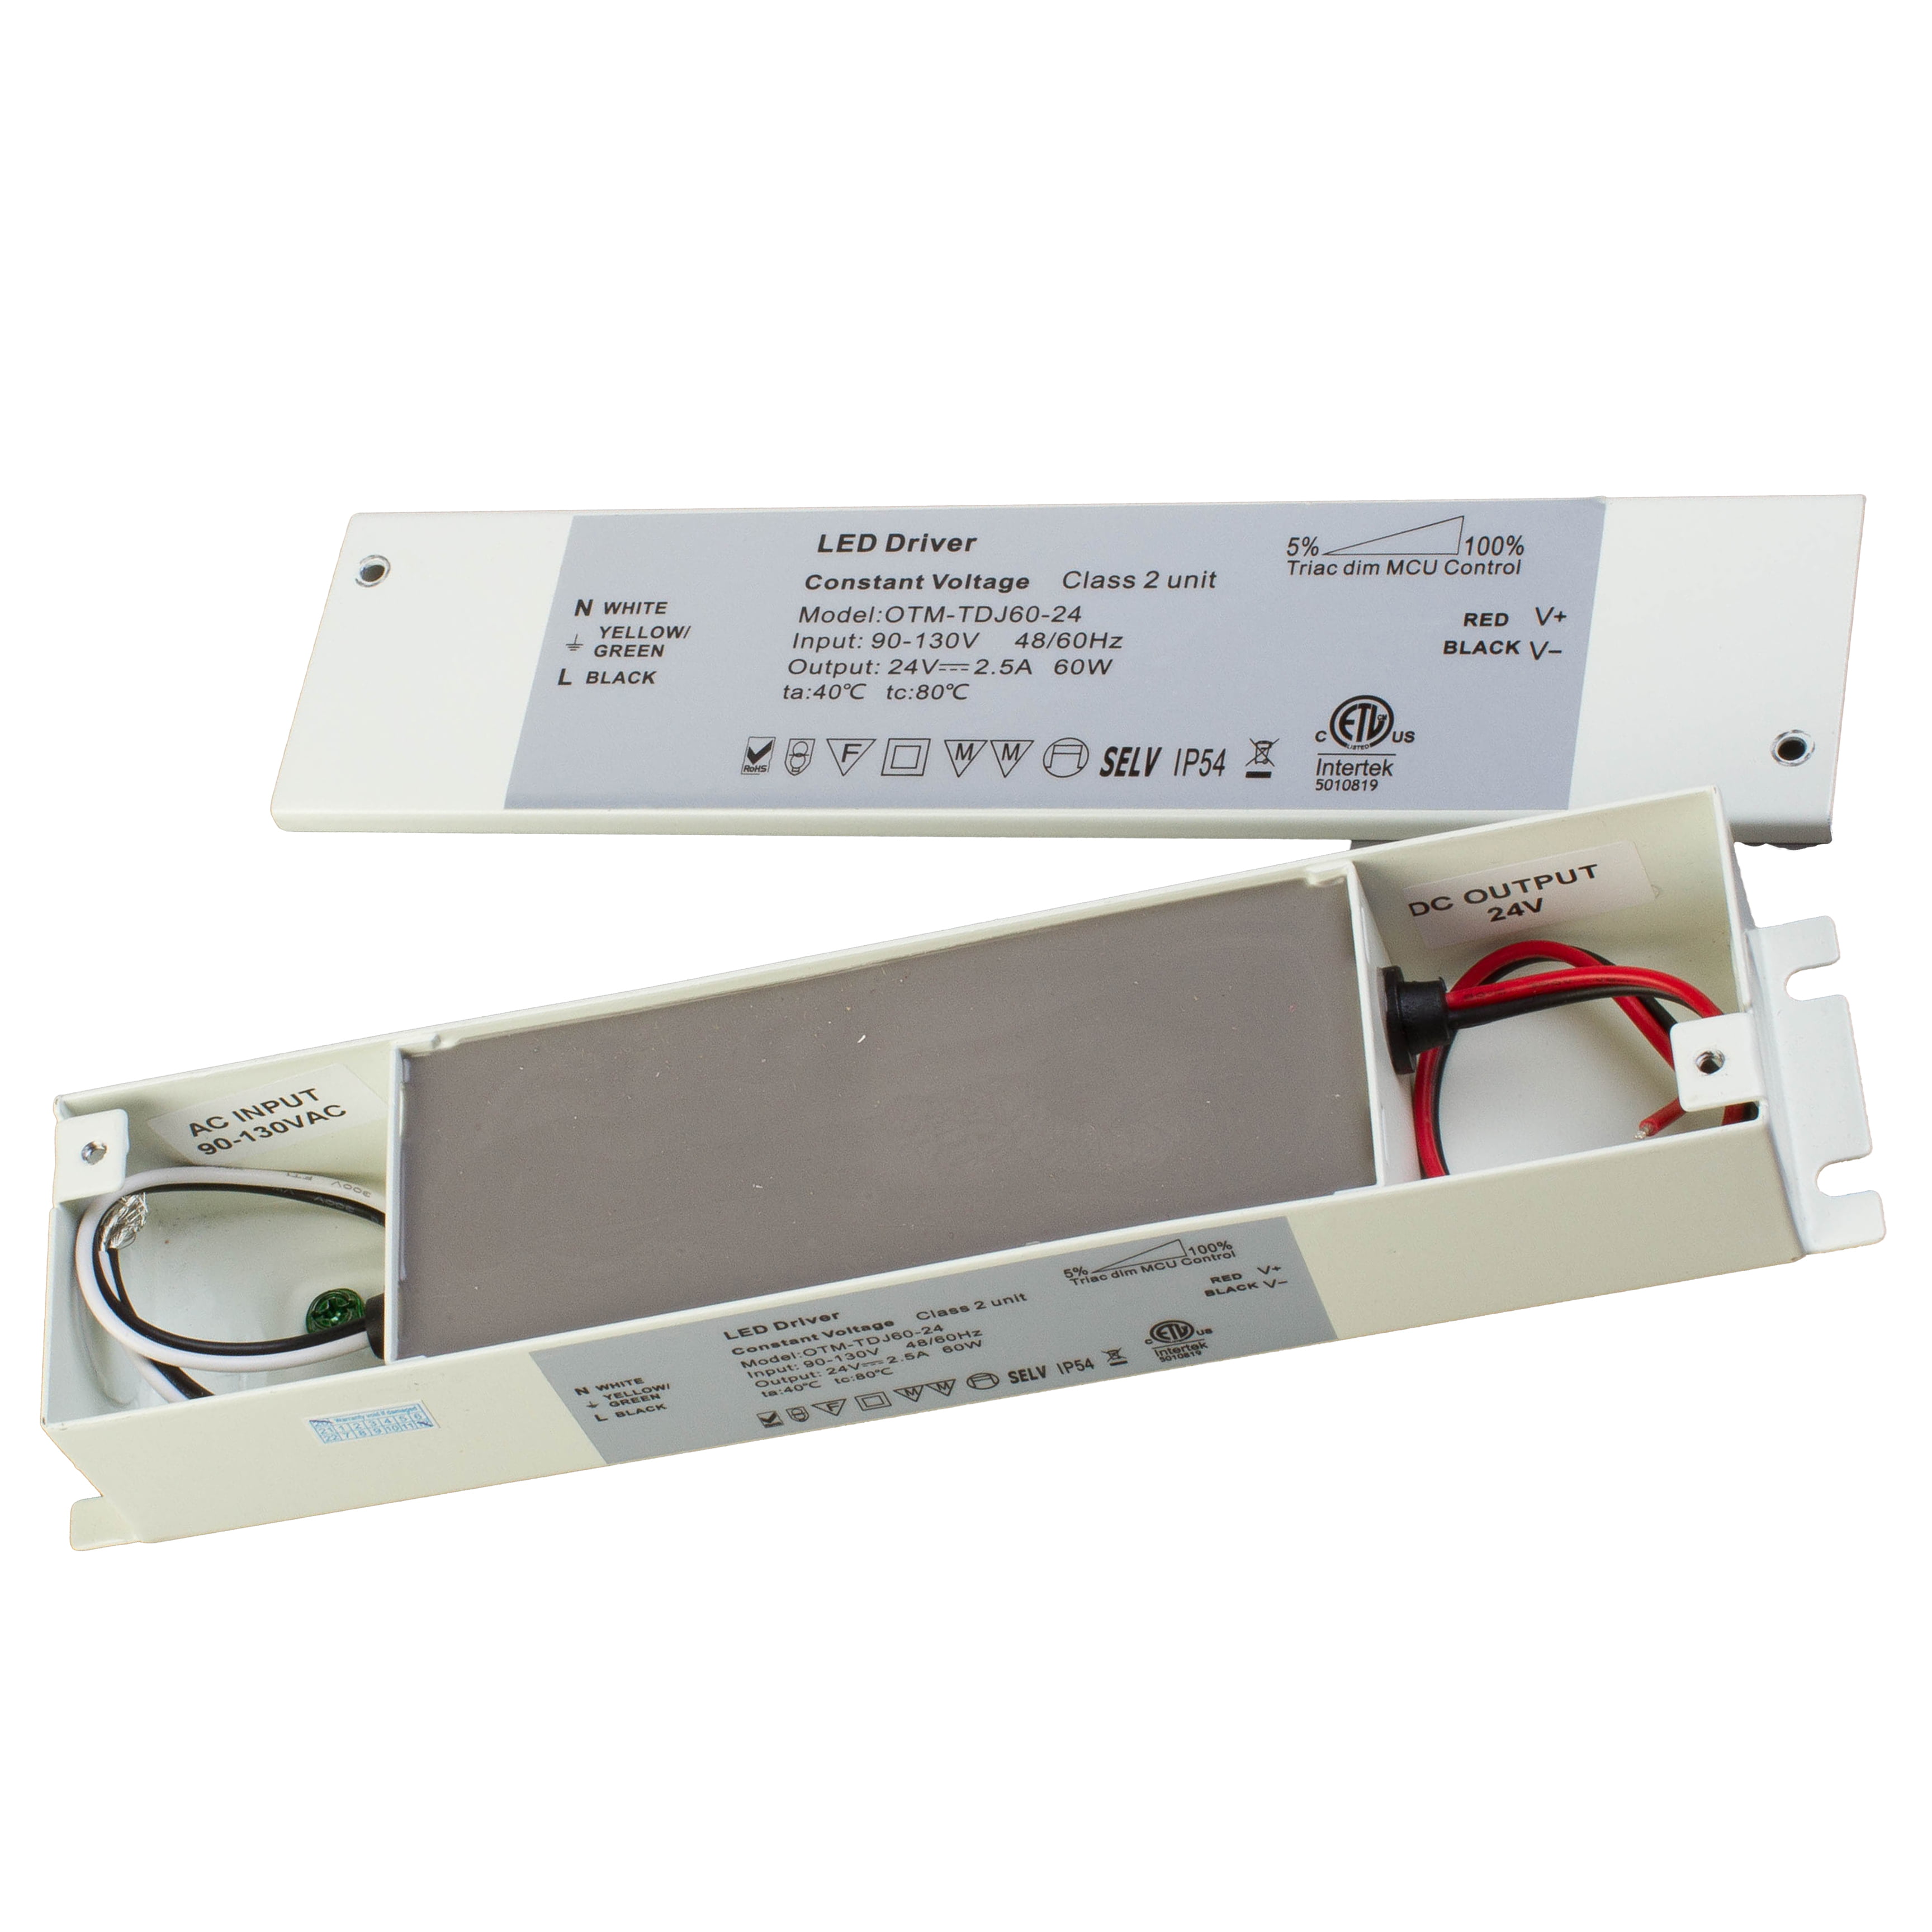 LEDupdates Dimmable LED Driver Triac, 24v 60w 2.5A Power Supply, ETL  Listed, Metal Junction Box Built-in AC to DC Class Compatible with most AC  Wall Dimmer for LED Light Strip